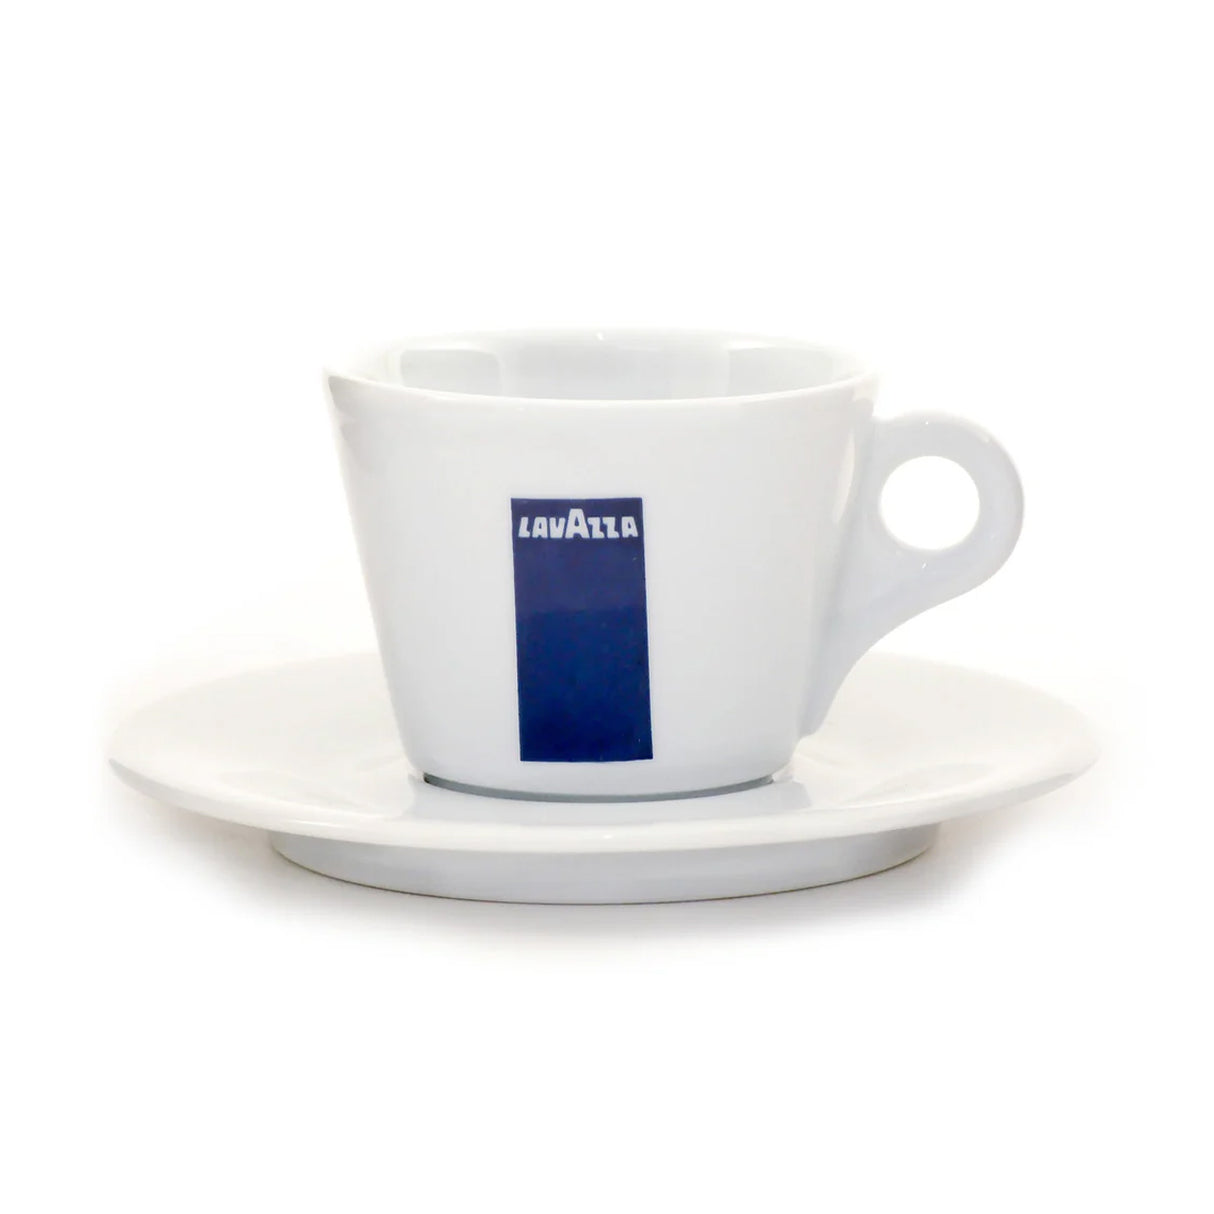 Lavazza Cappuccino Saucers (6 saucers)